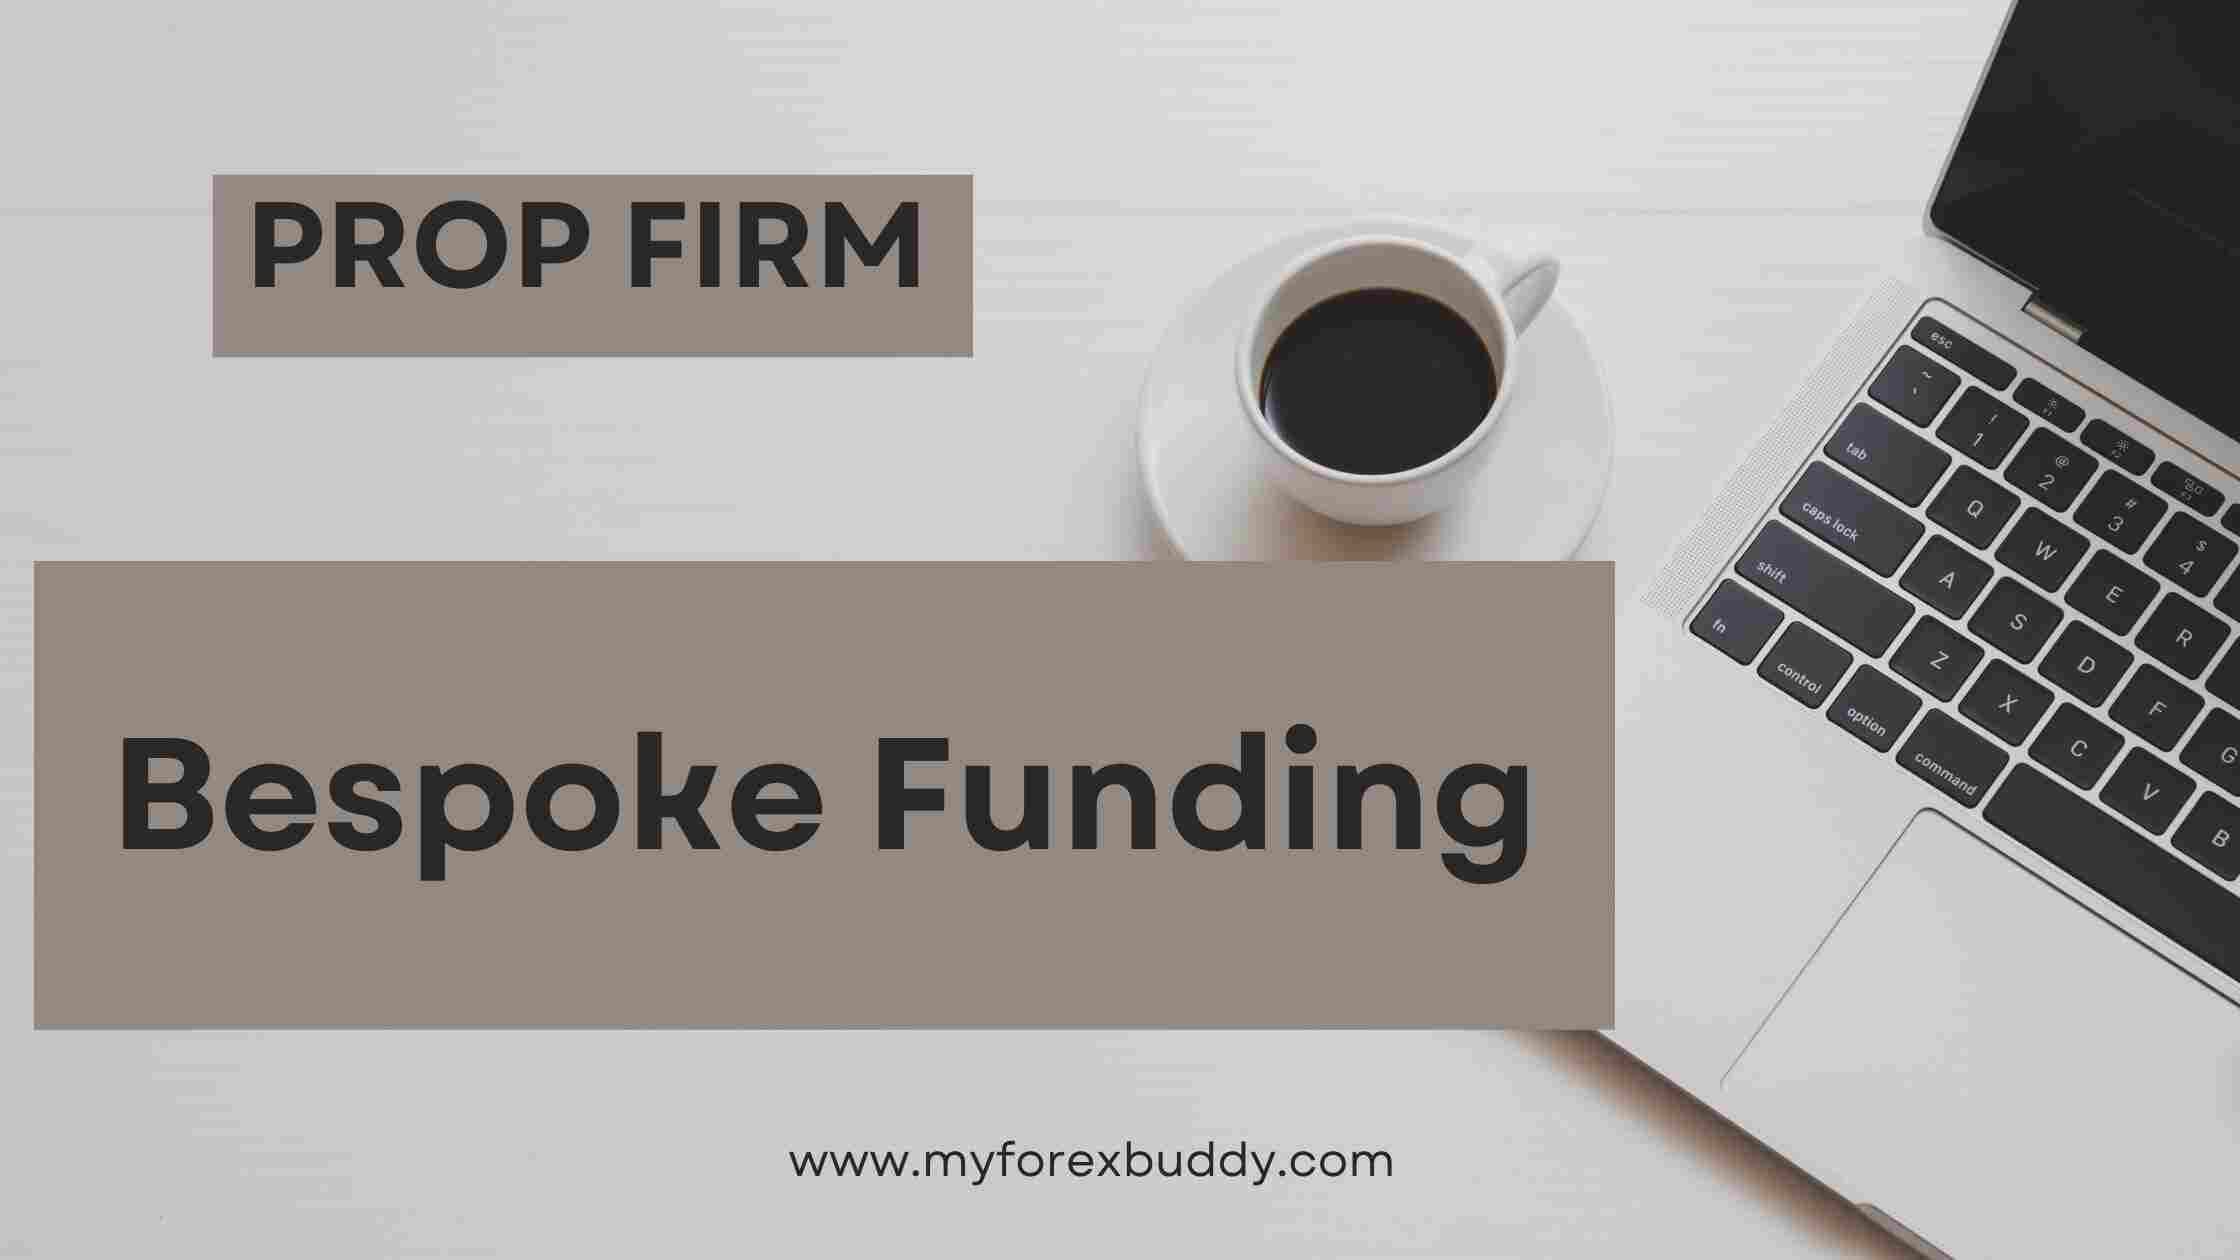 Bespoke Funding Review: Is it the Best UK based Prop firm?